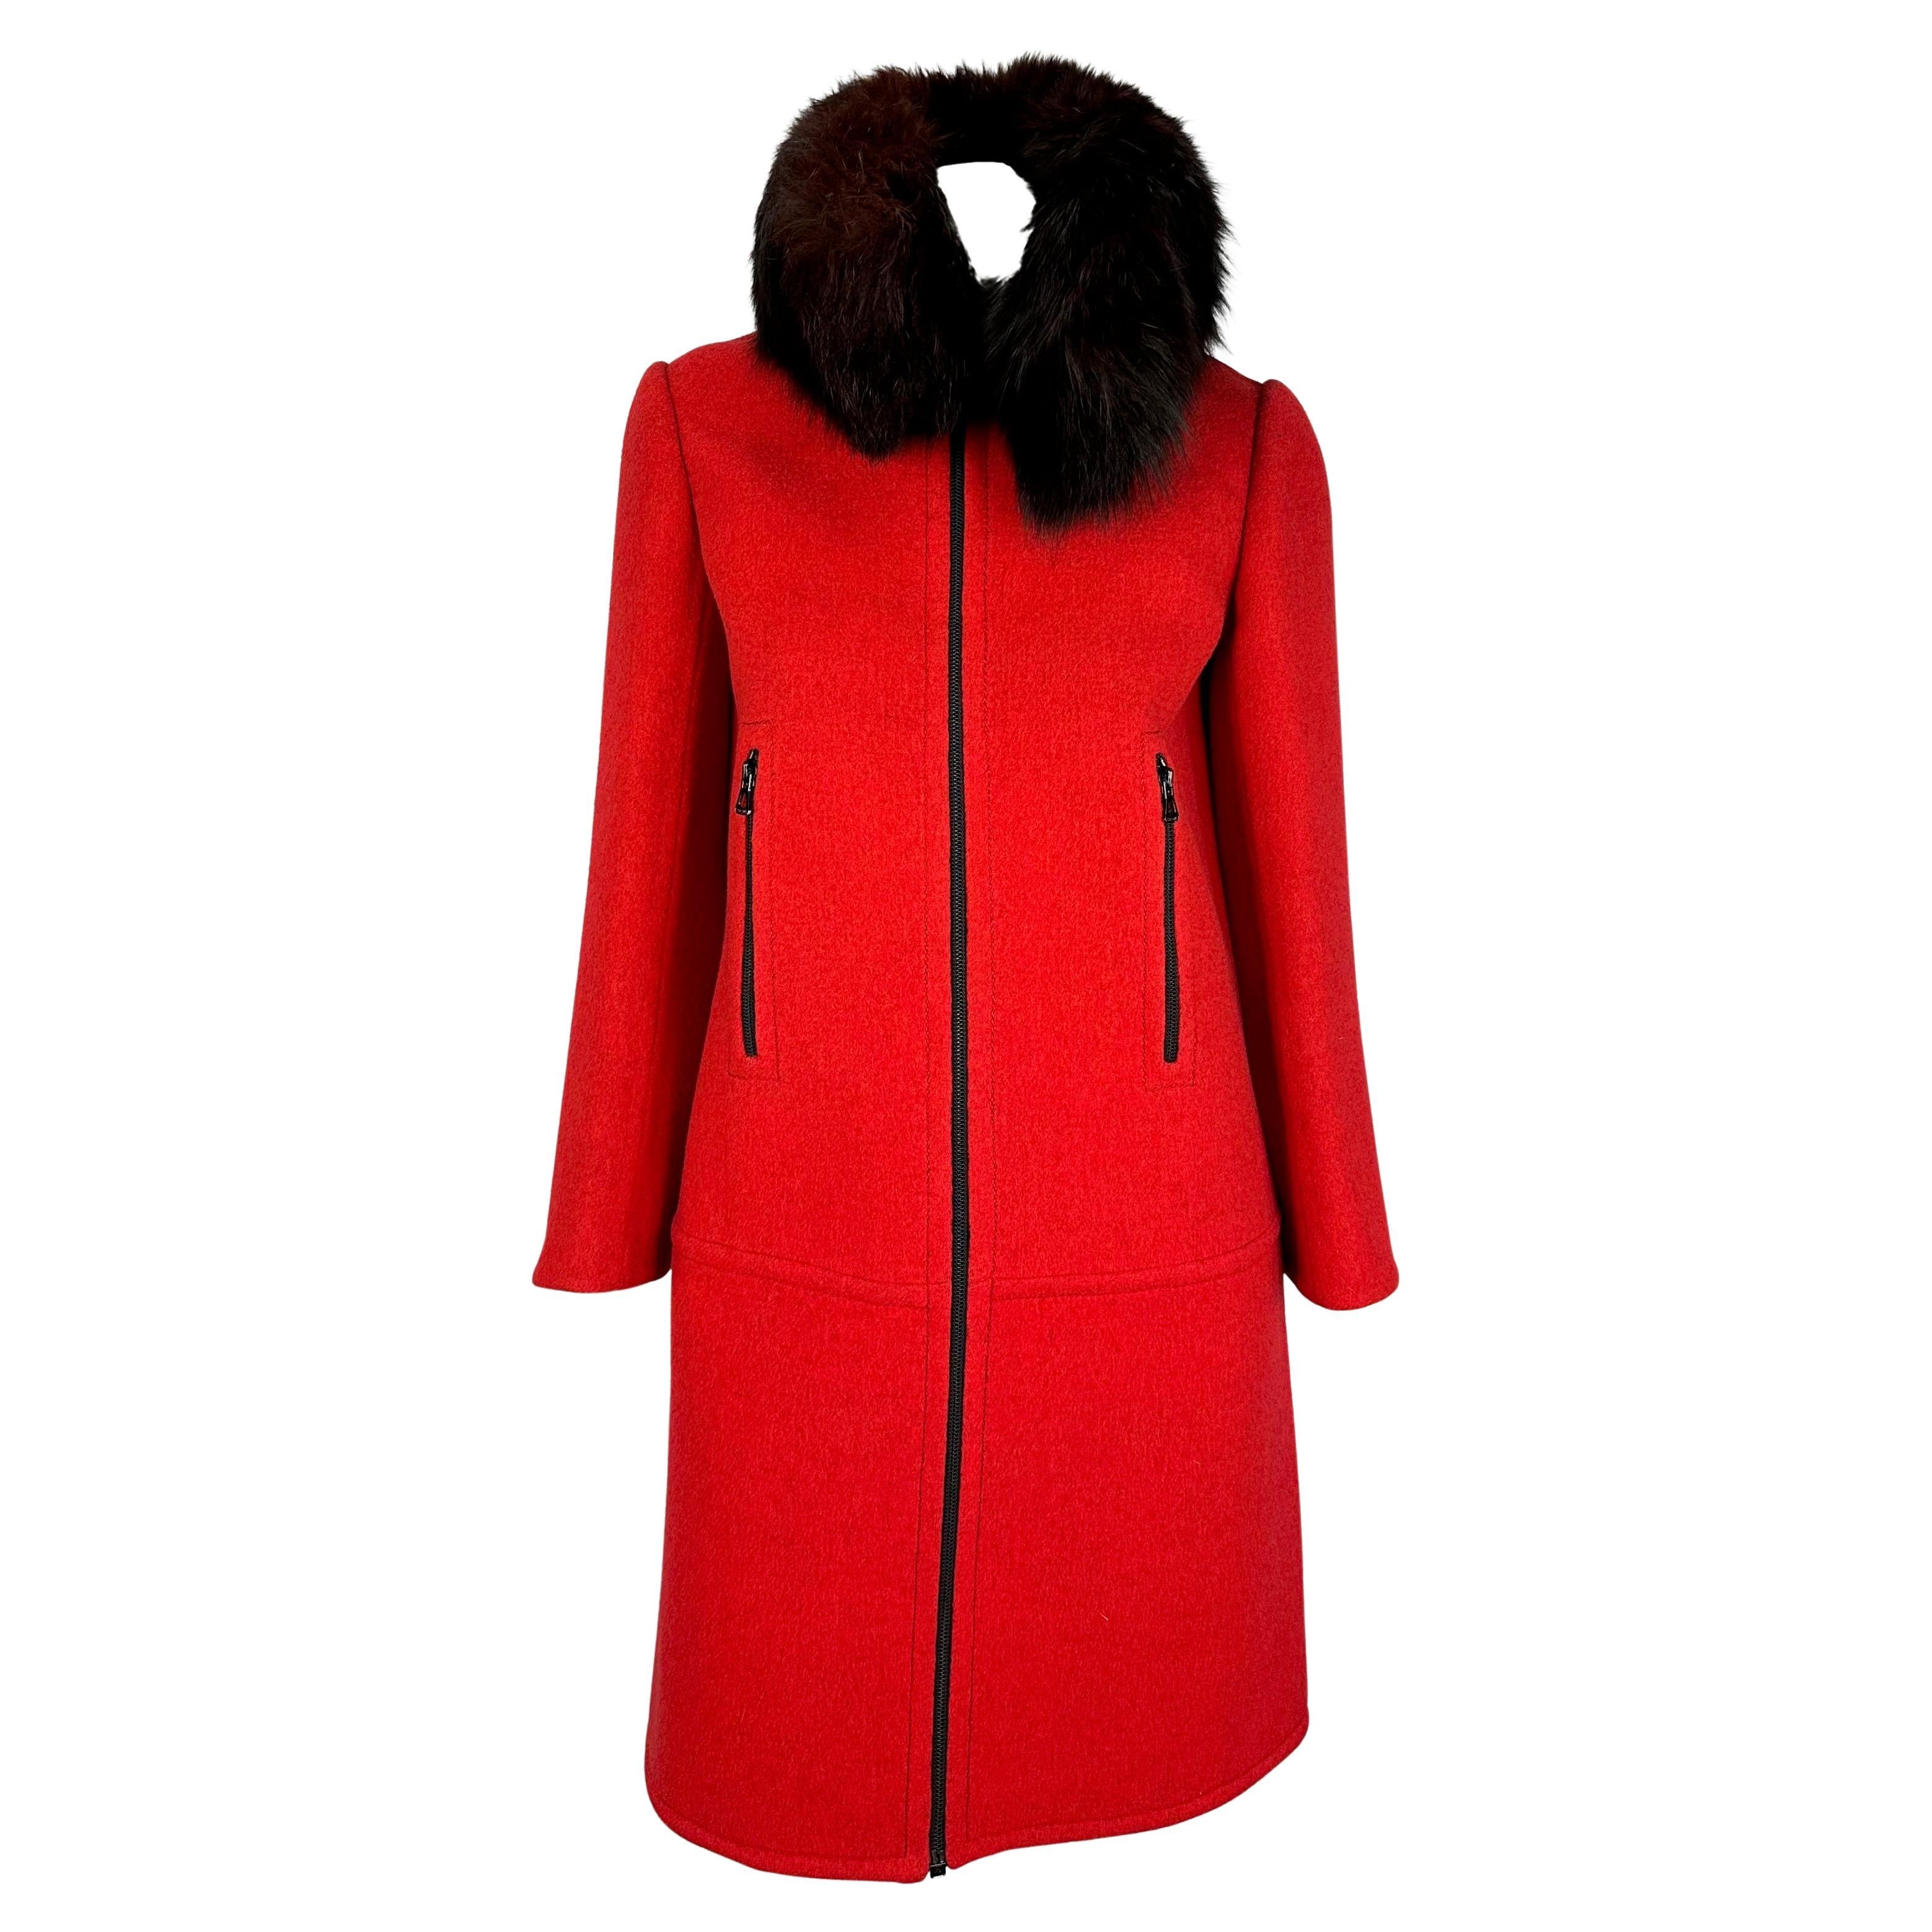 Women's F/W 1969 Christian Dior Haute Couture Red Wool Fur Collar Jacket  For Sale